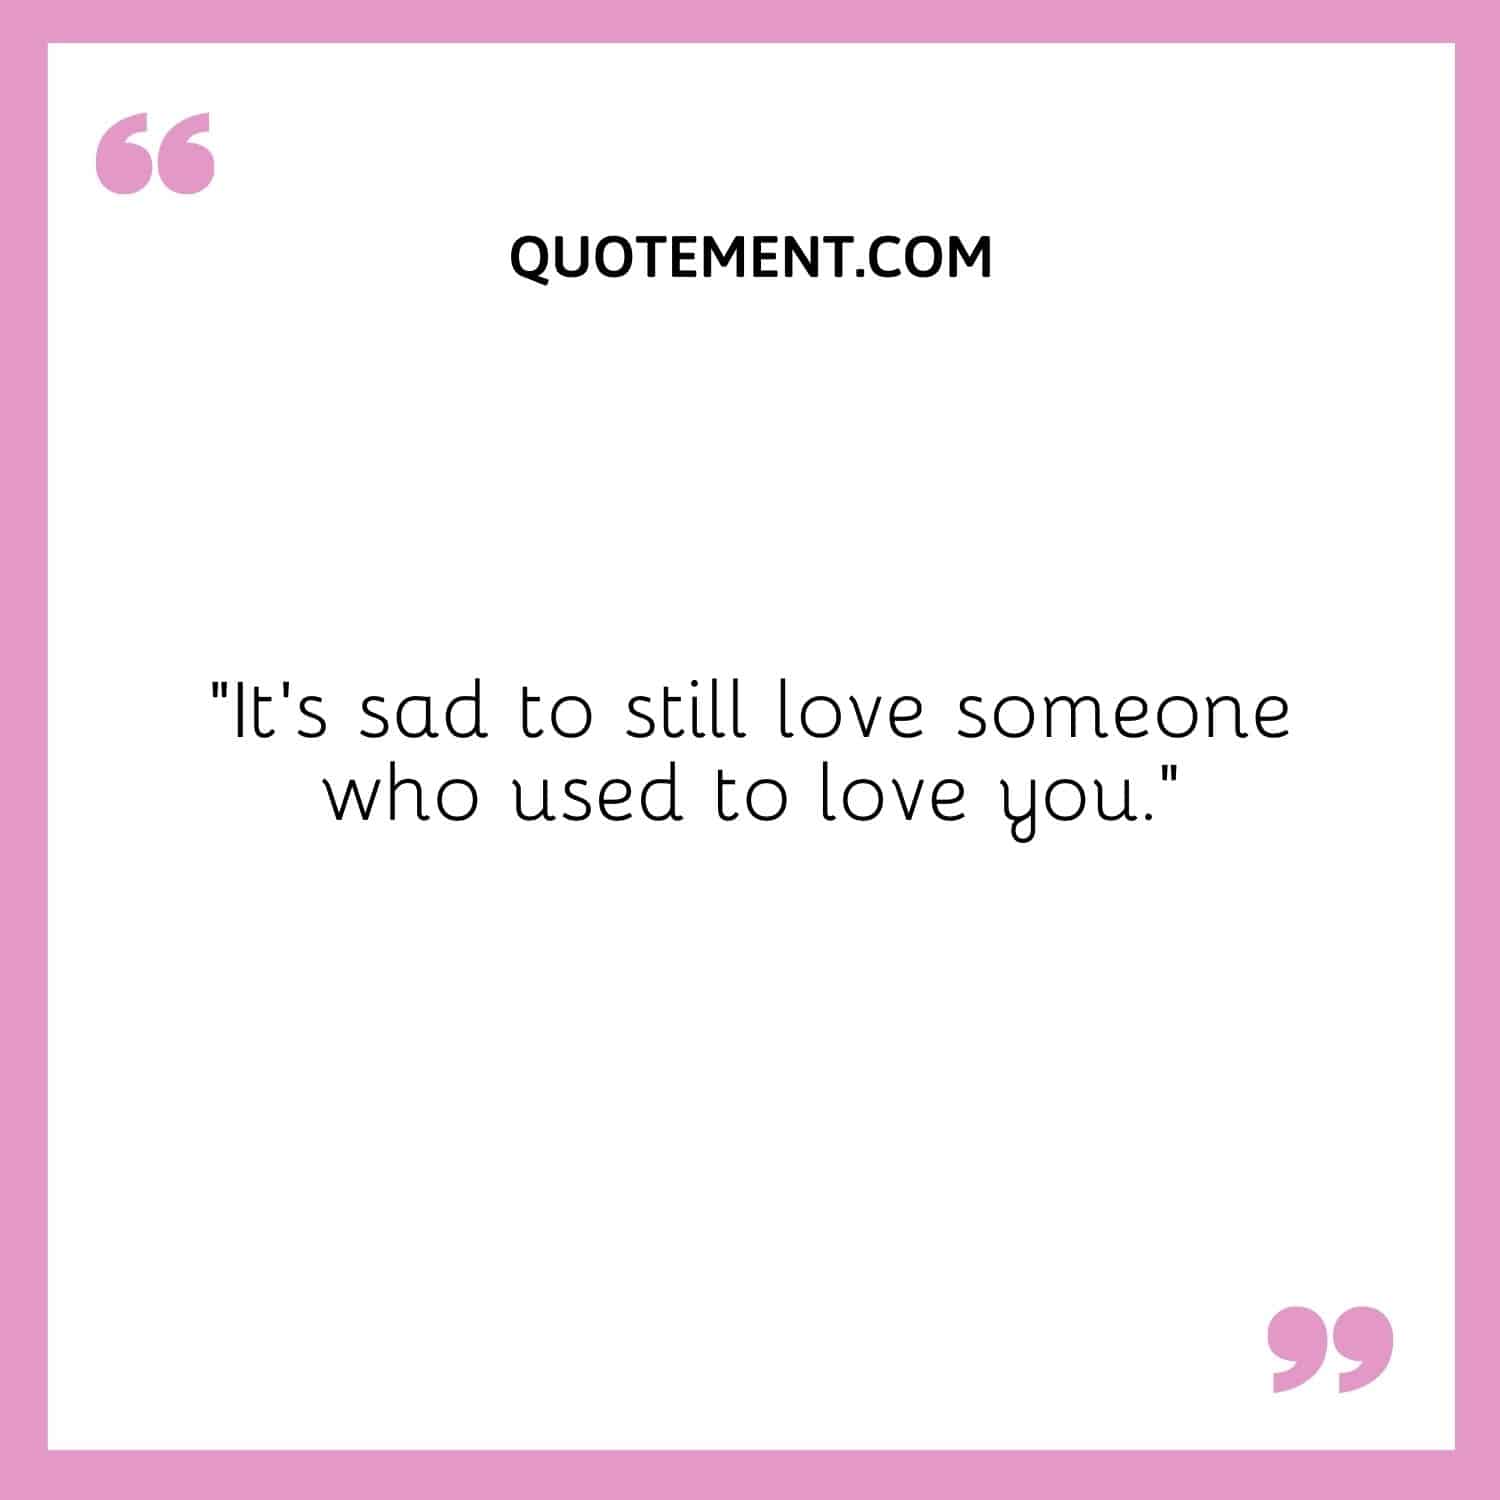 It’s sad to still love someone who used to love you